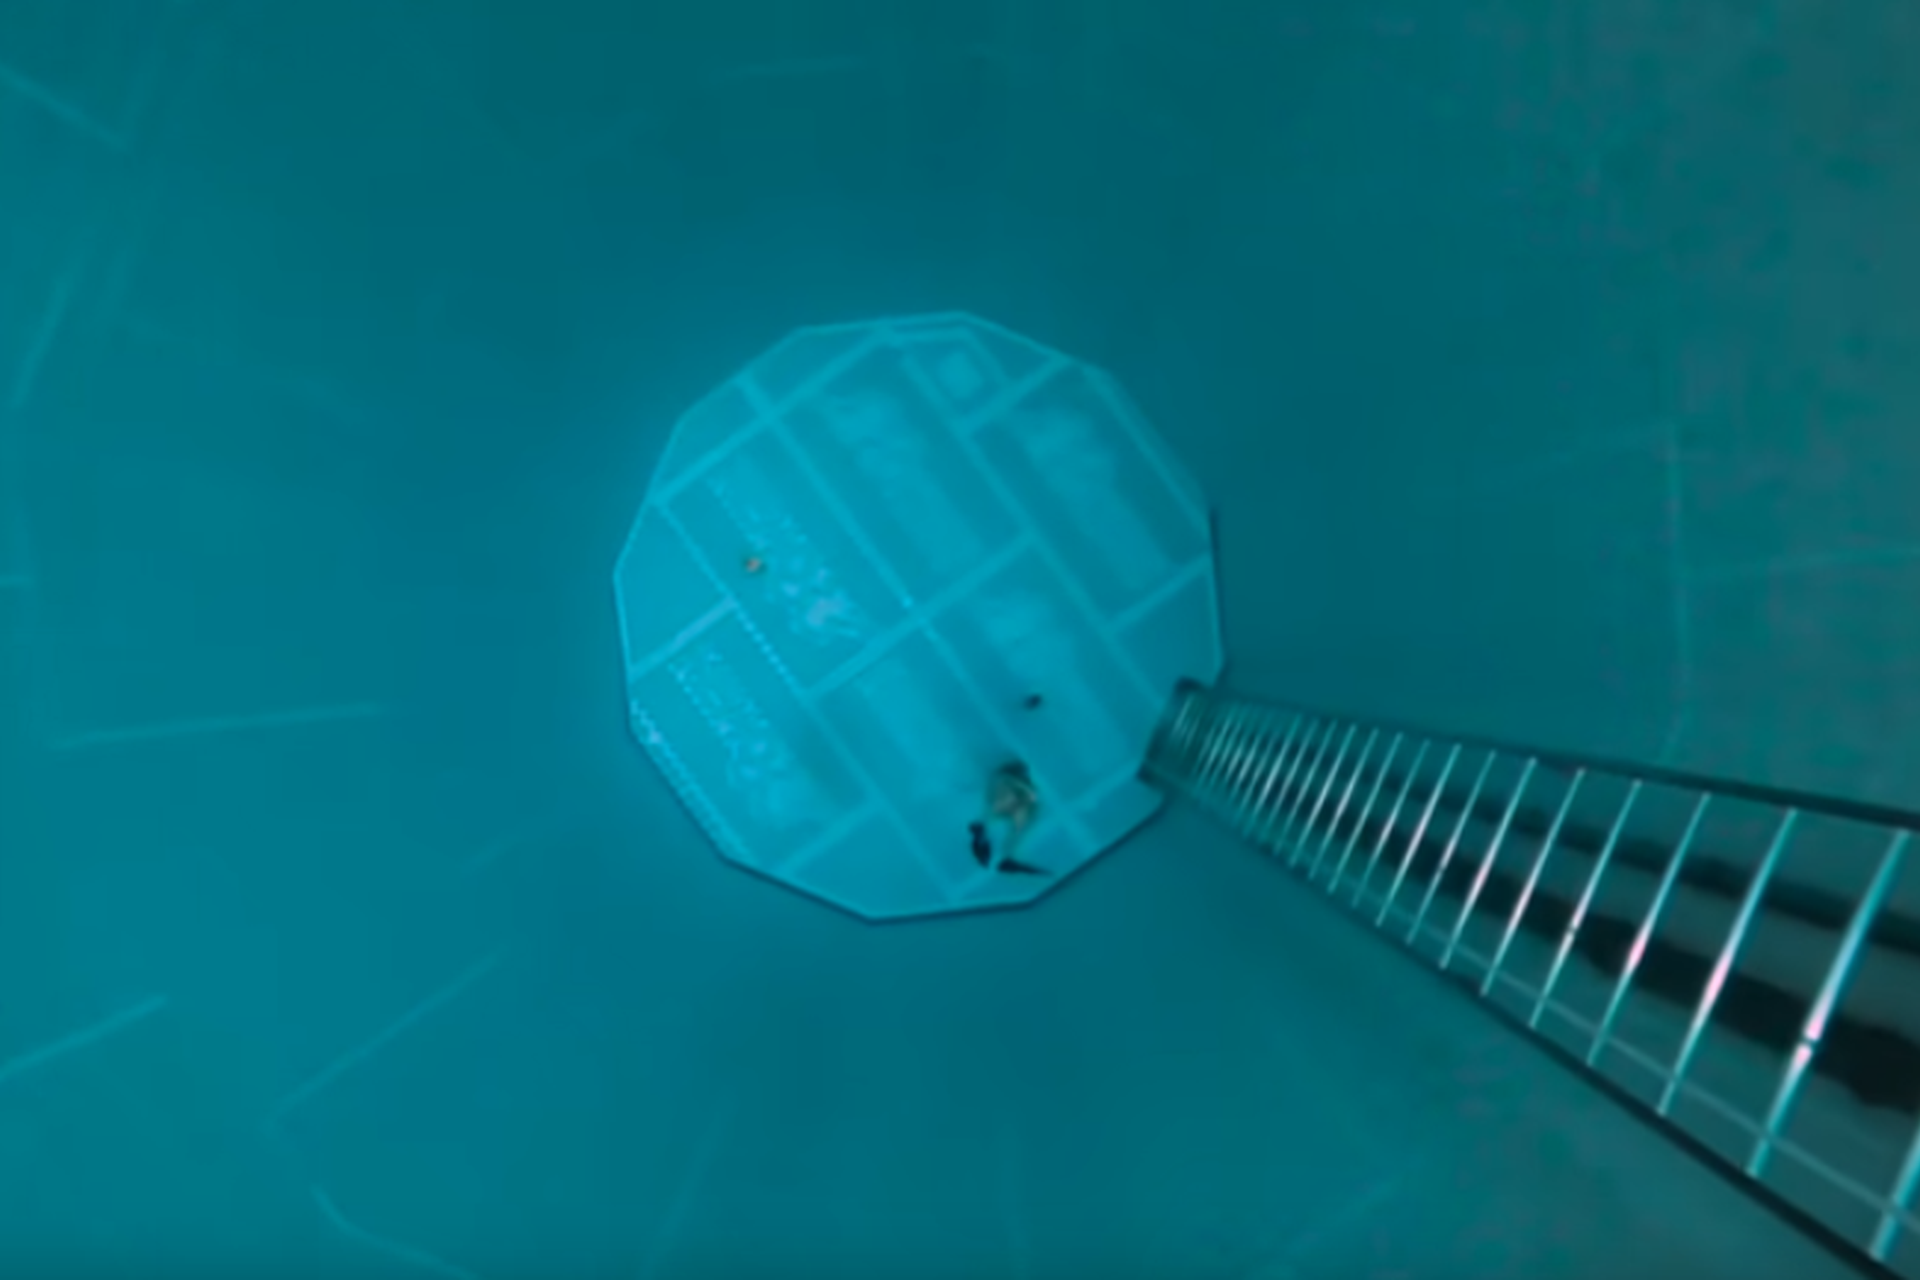 <p>Since 2004, the 'Nemo 33' swimming pool has been located in the municipality of Uccle, near Brussels. It is the deepest in the world with a diving pit of 35 meters (115 ft) deep. Several portholes allow a view in both directions between the pool and the bar /  restaurant.</p>